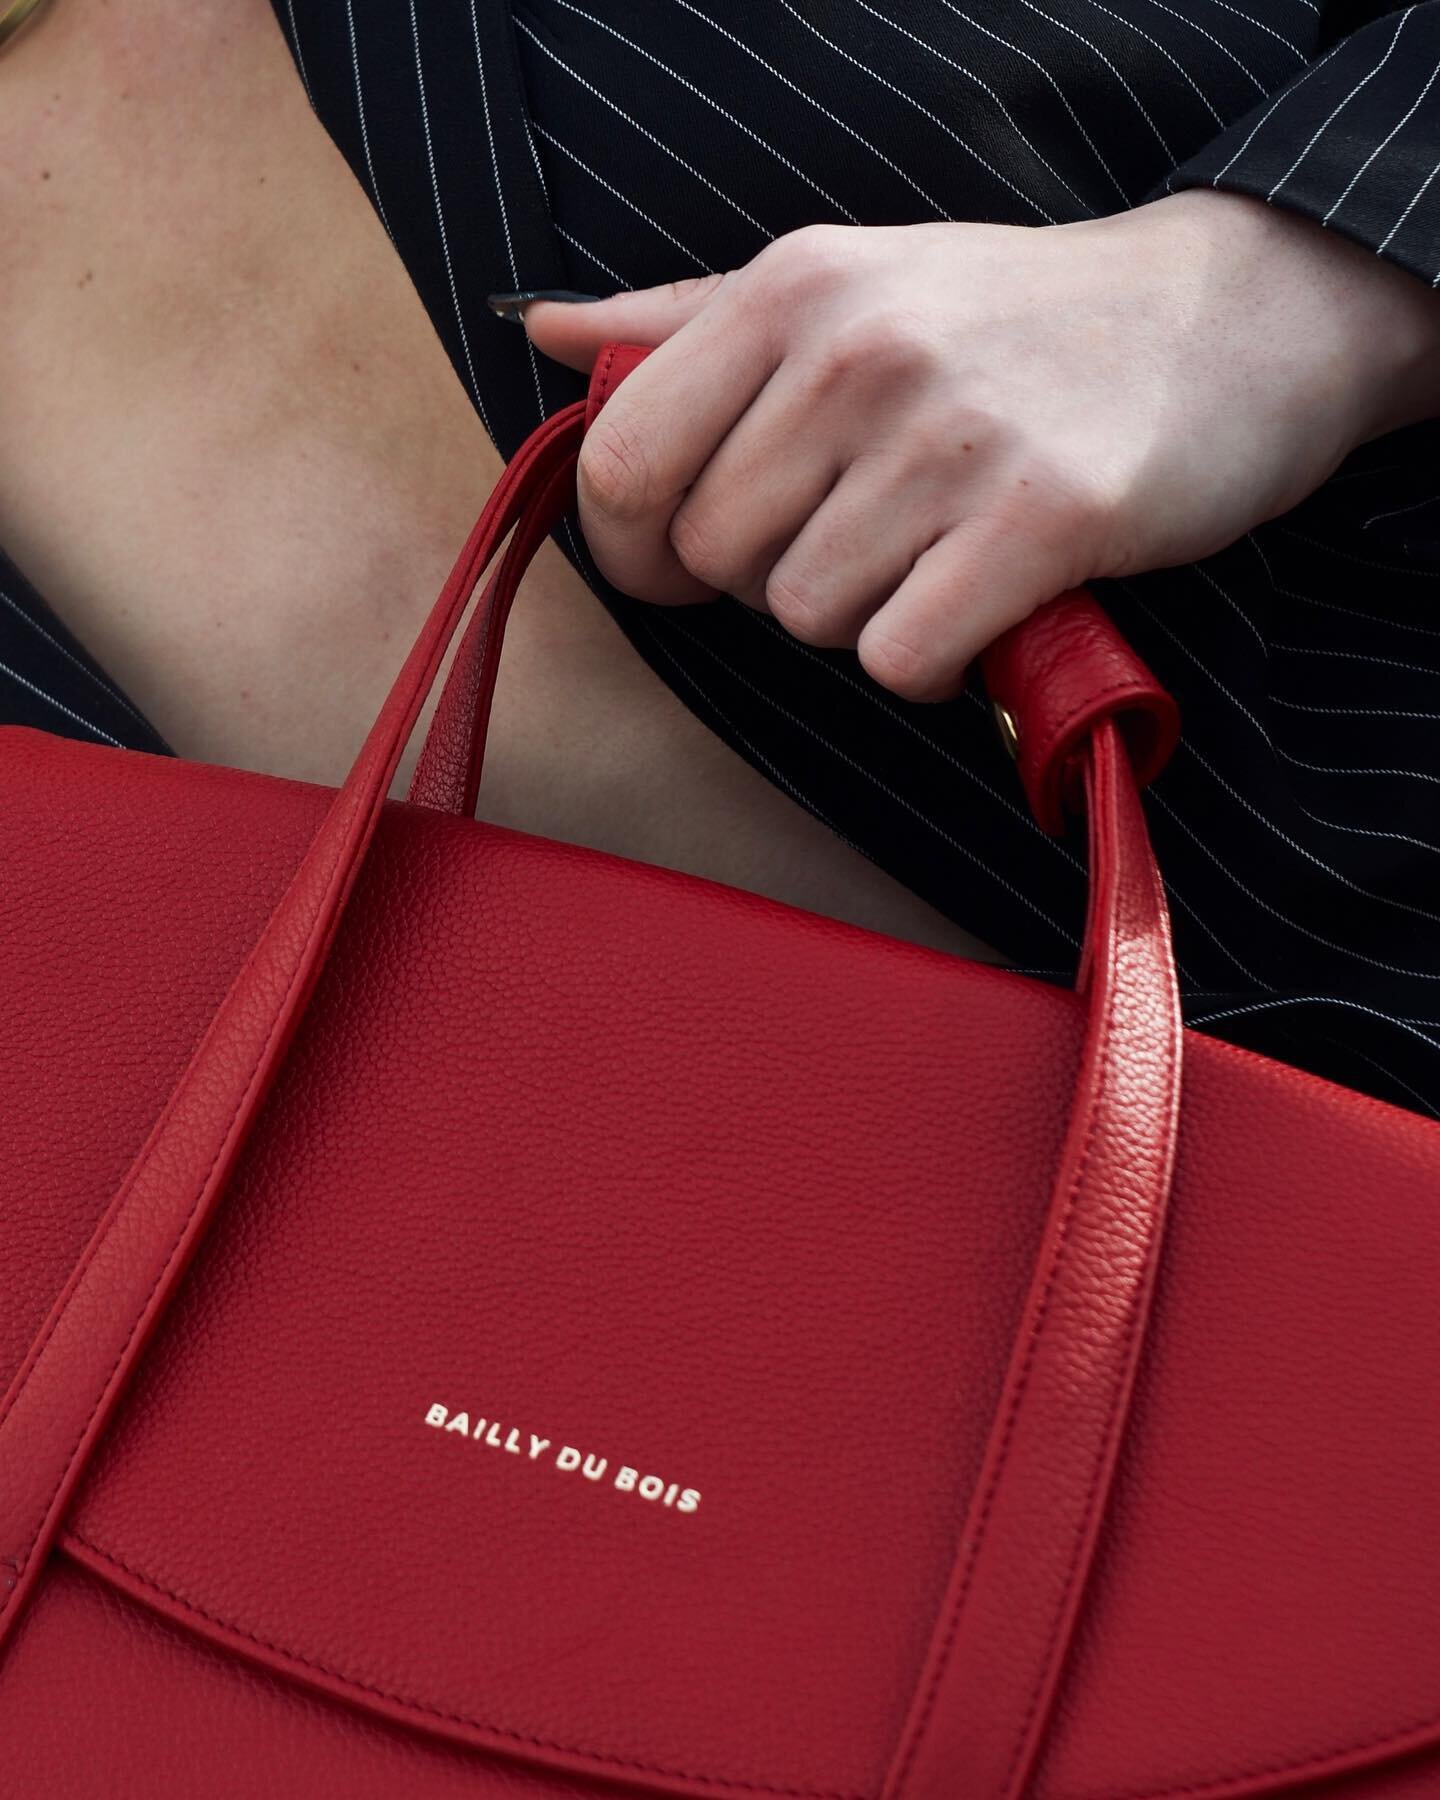 The #baillydubois red leather briefcase! Be a boss in style 💼💼👩🏾&zwj;💻👩🏽&zwj;💻👩🏼&zwj;💻👩🏻&zwj;💻#briefcase#red#leather#minimal